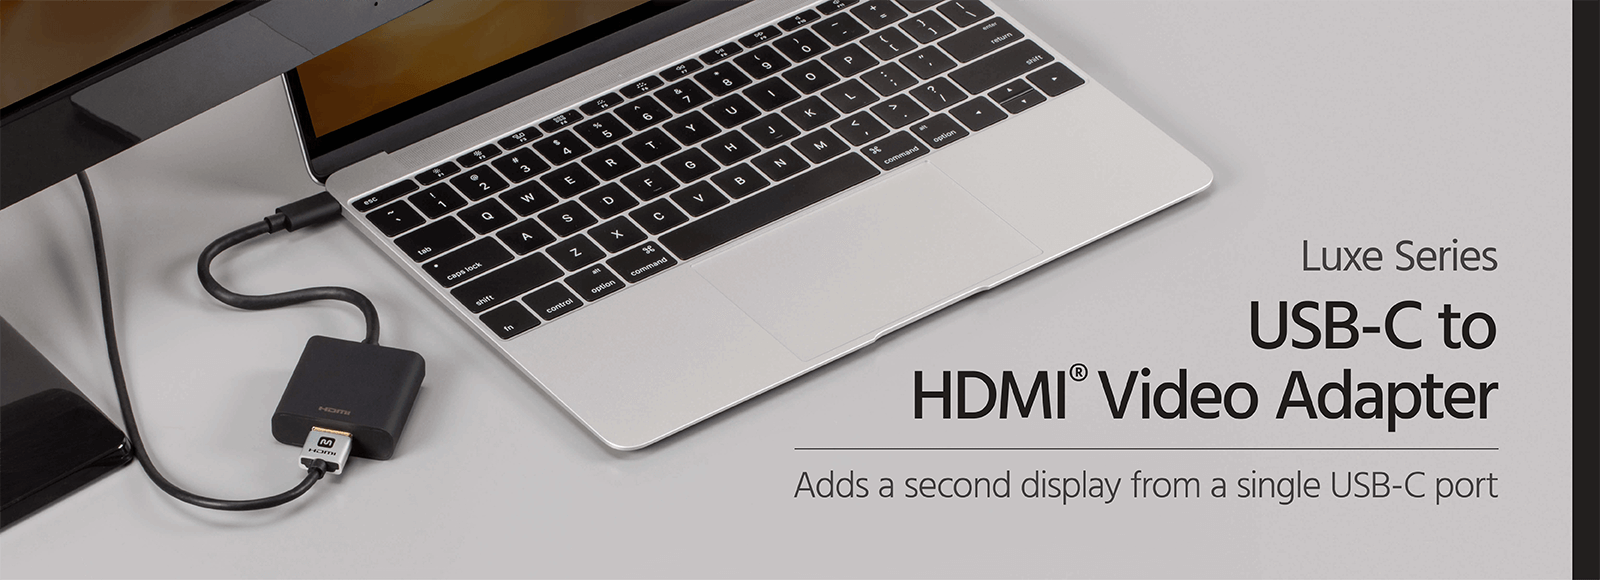 USB-C to HDMI Video Adapter